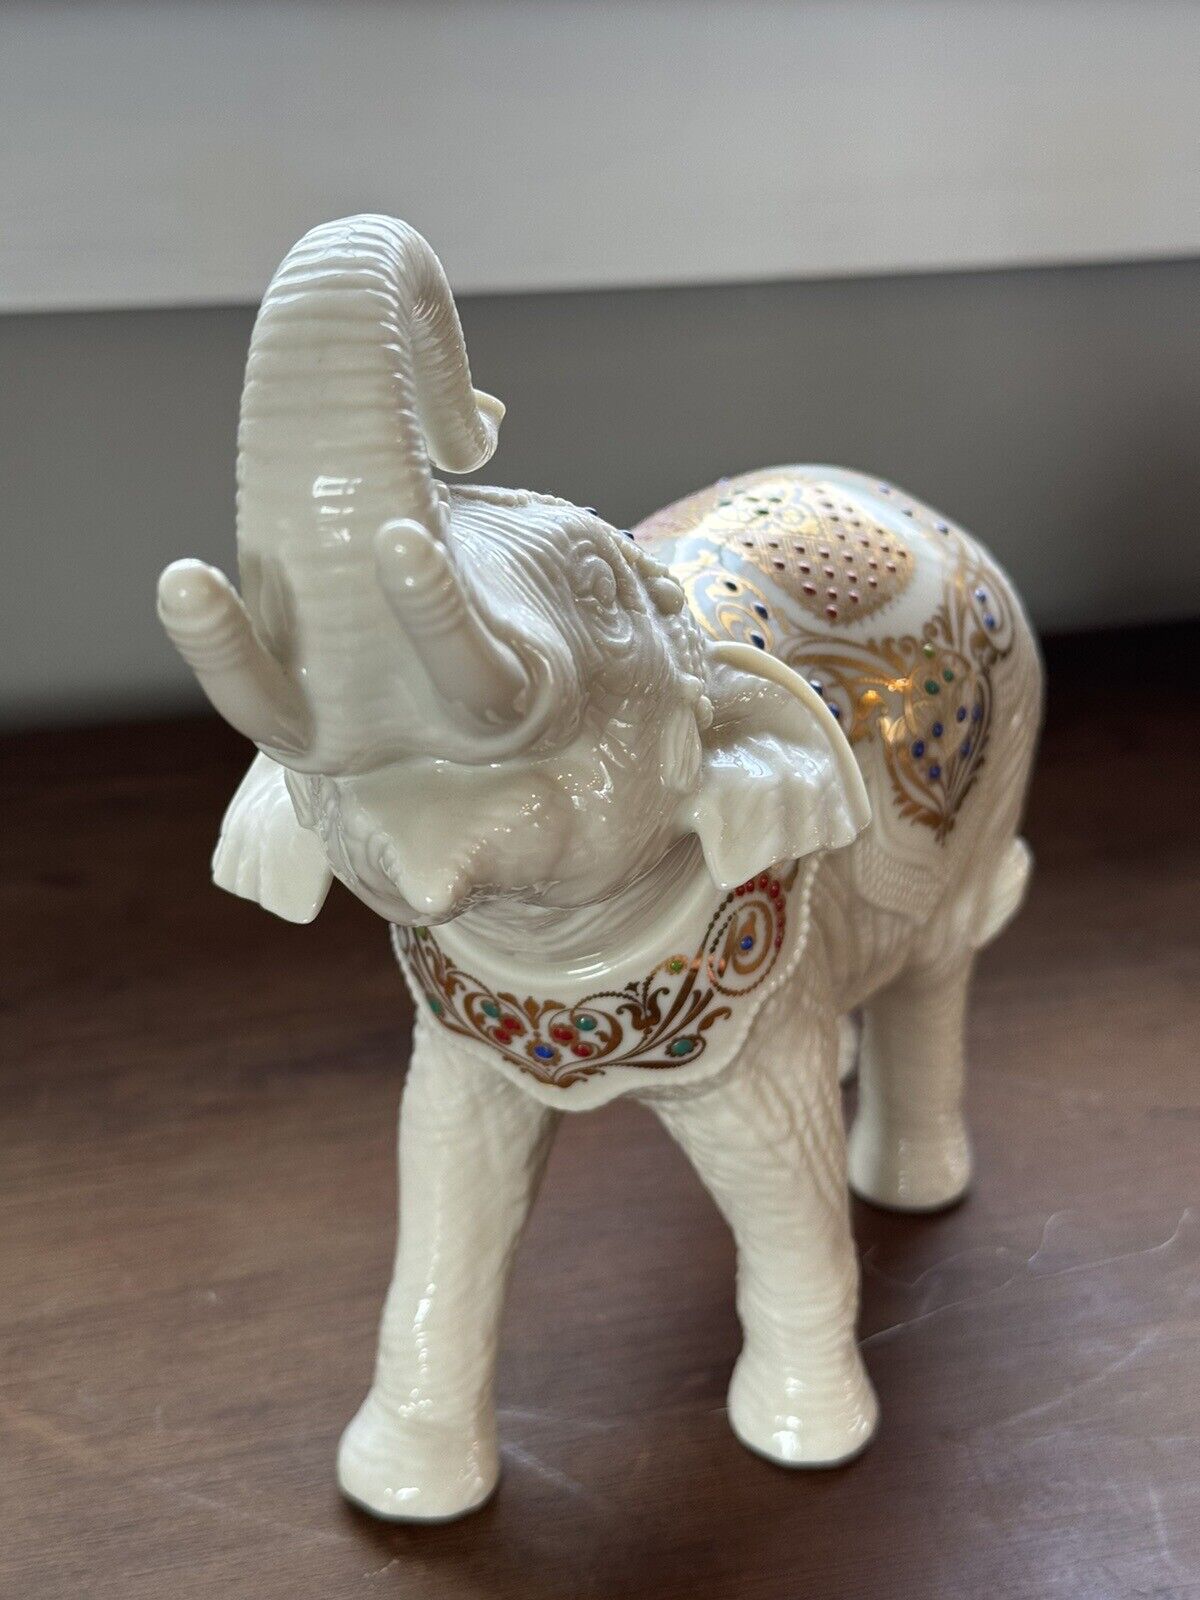 Stunning 1995 Lenox Decorated Elephant Made in USA